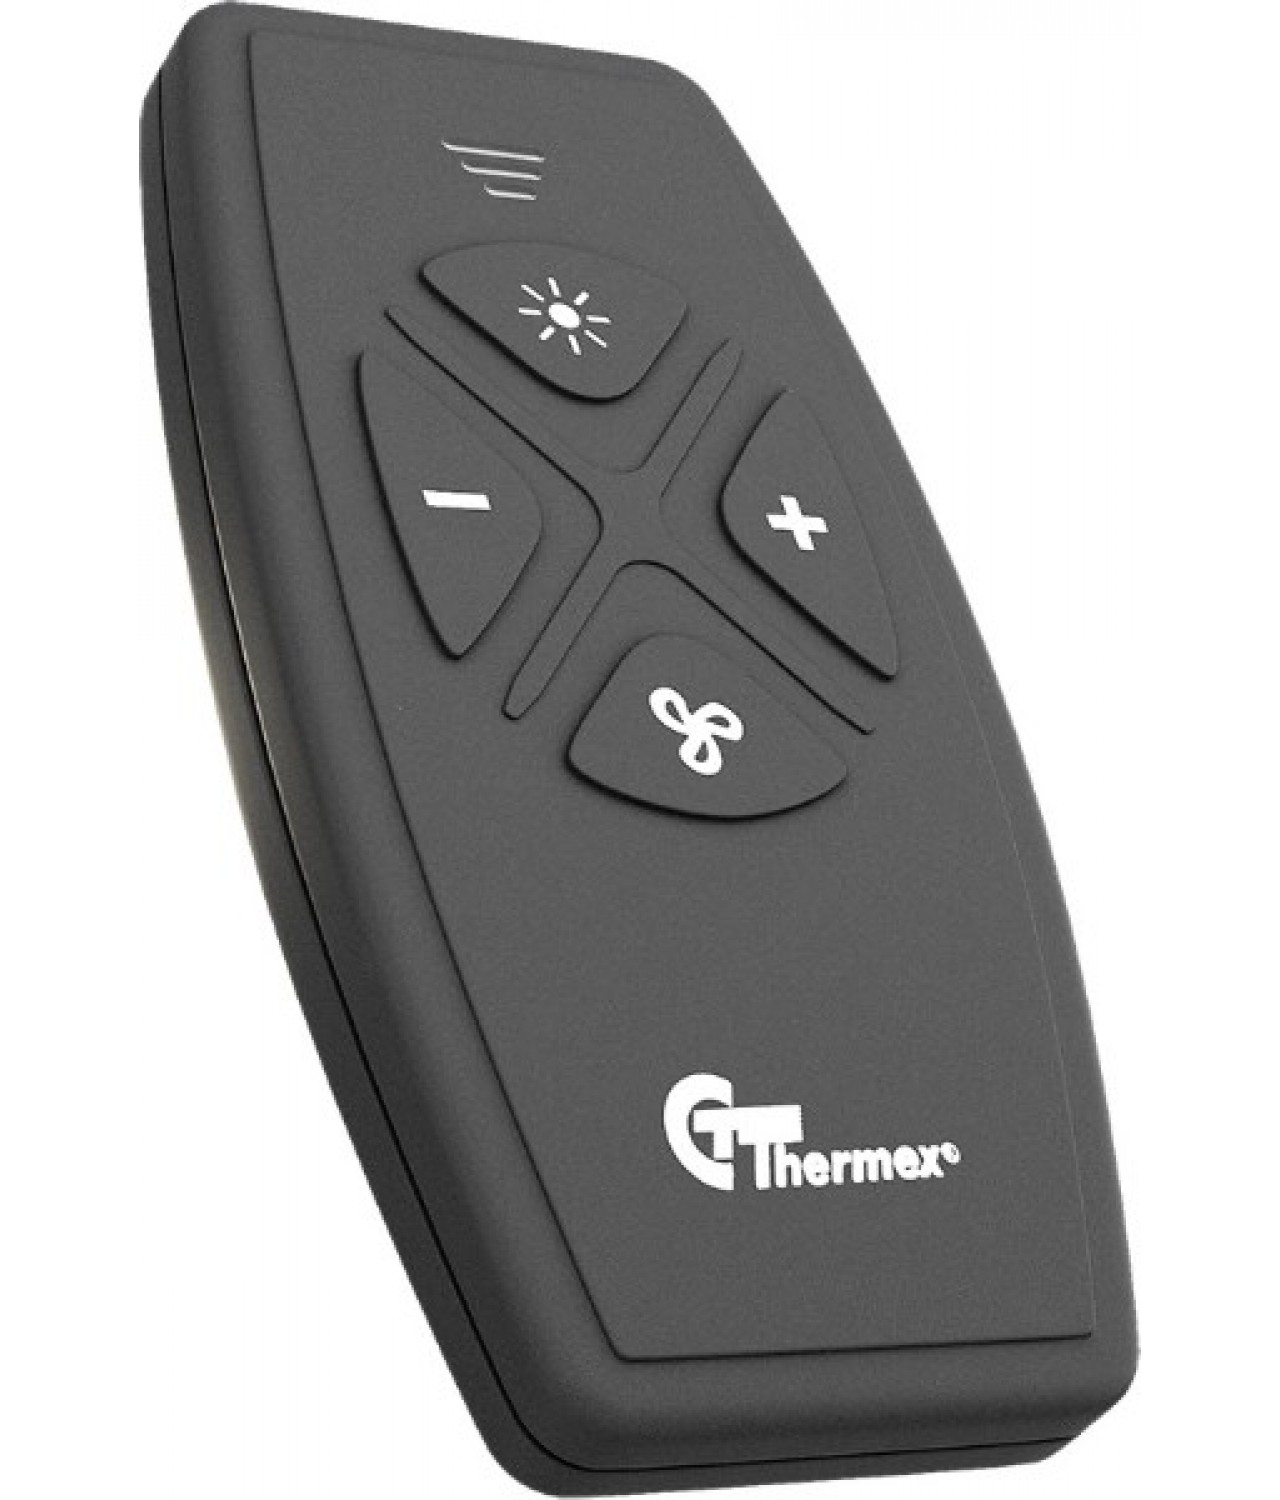 Thermex cooker hood remote control